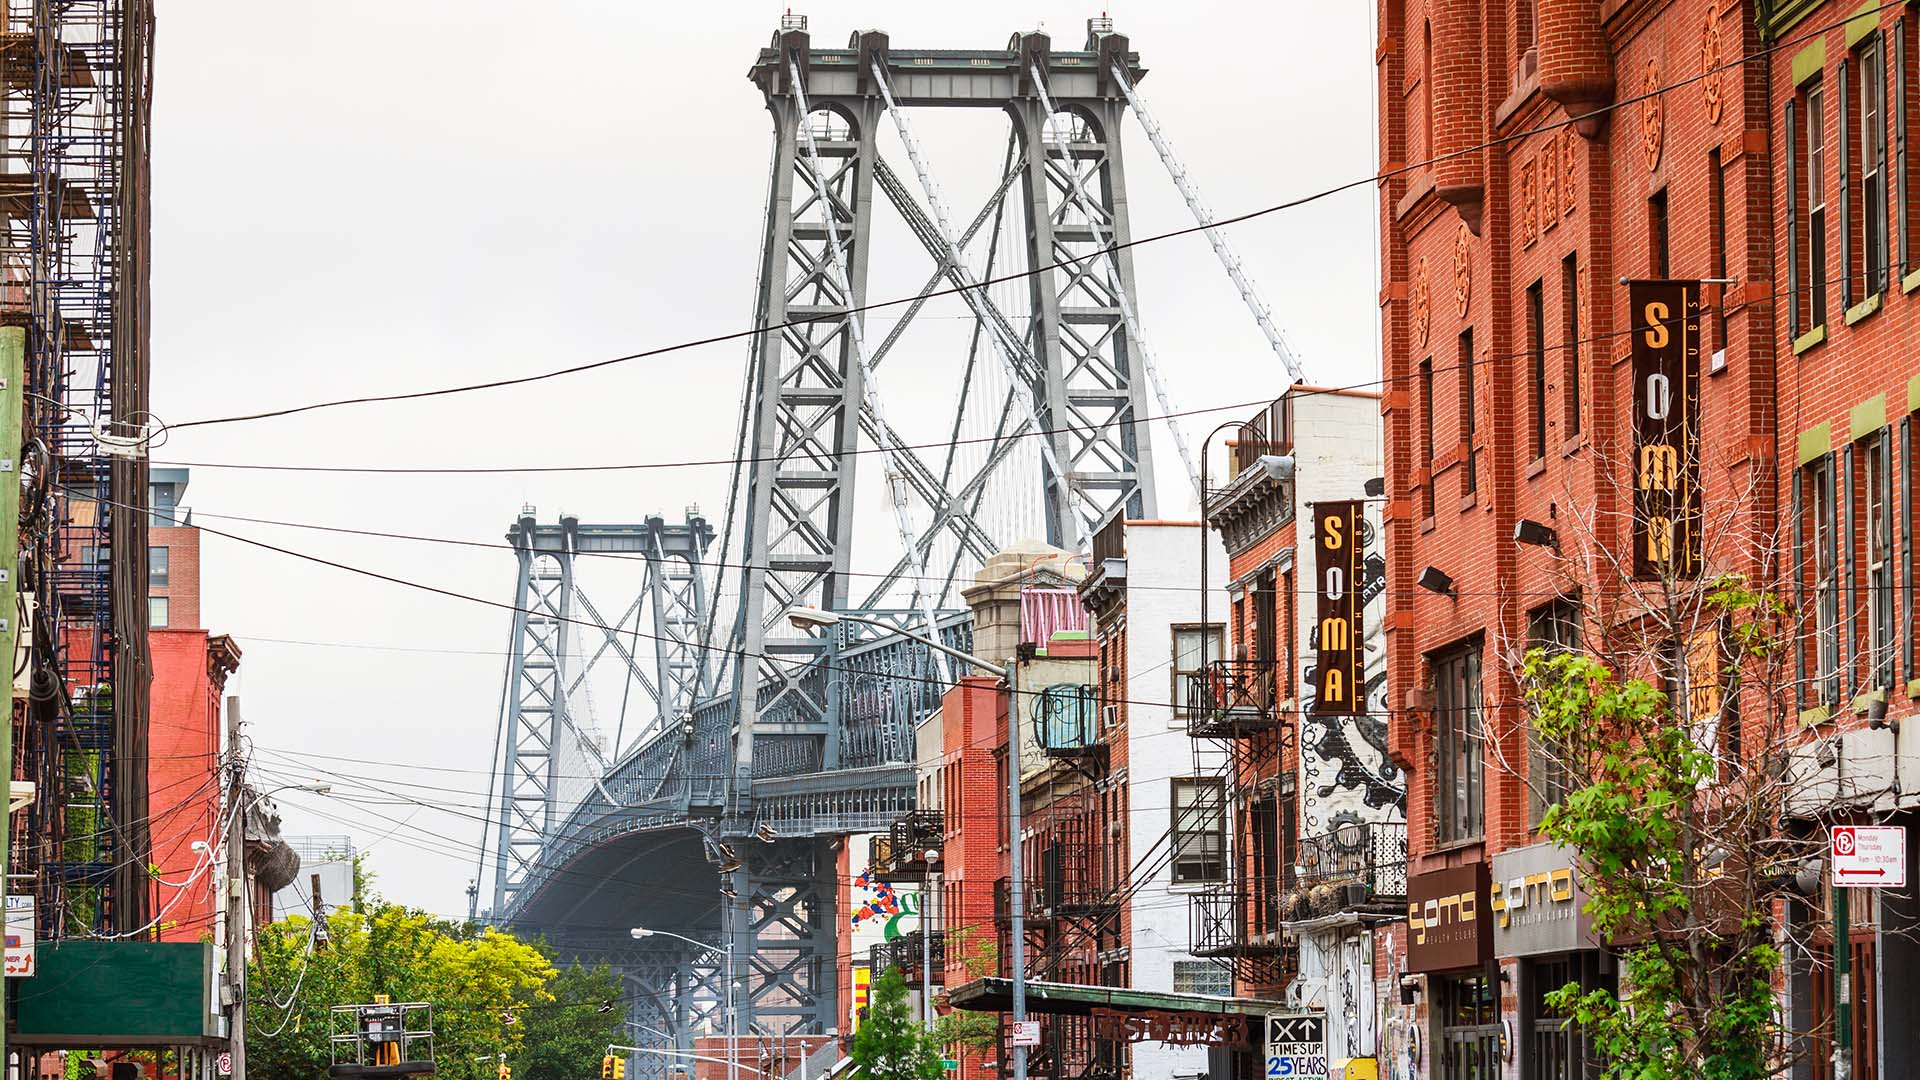 A view of the Williamsburg Bridge in New York City